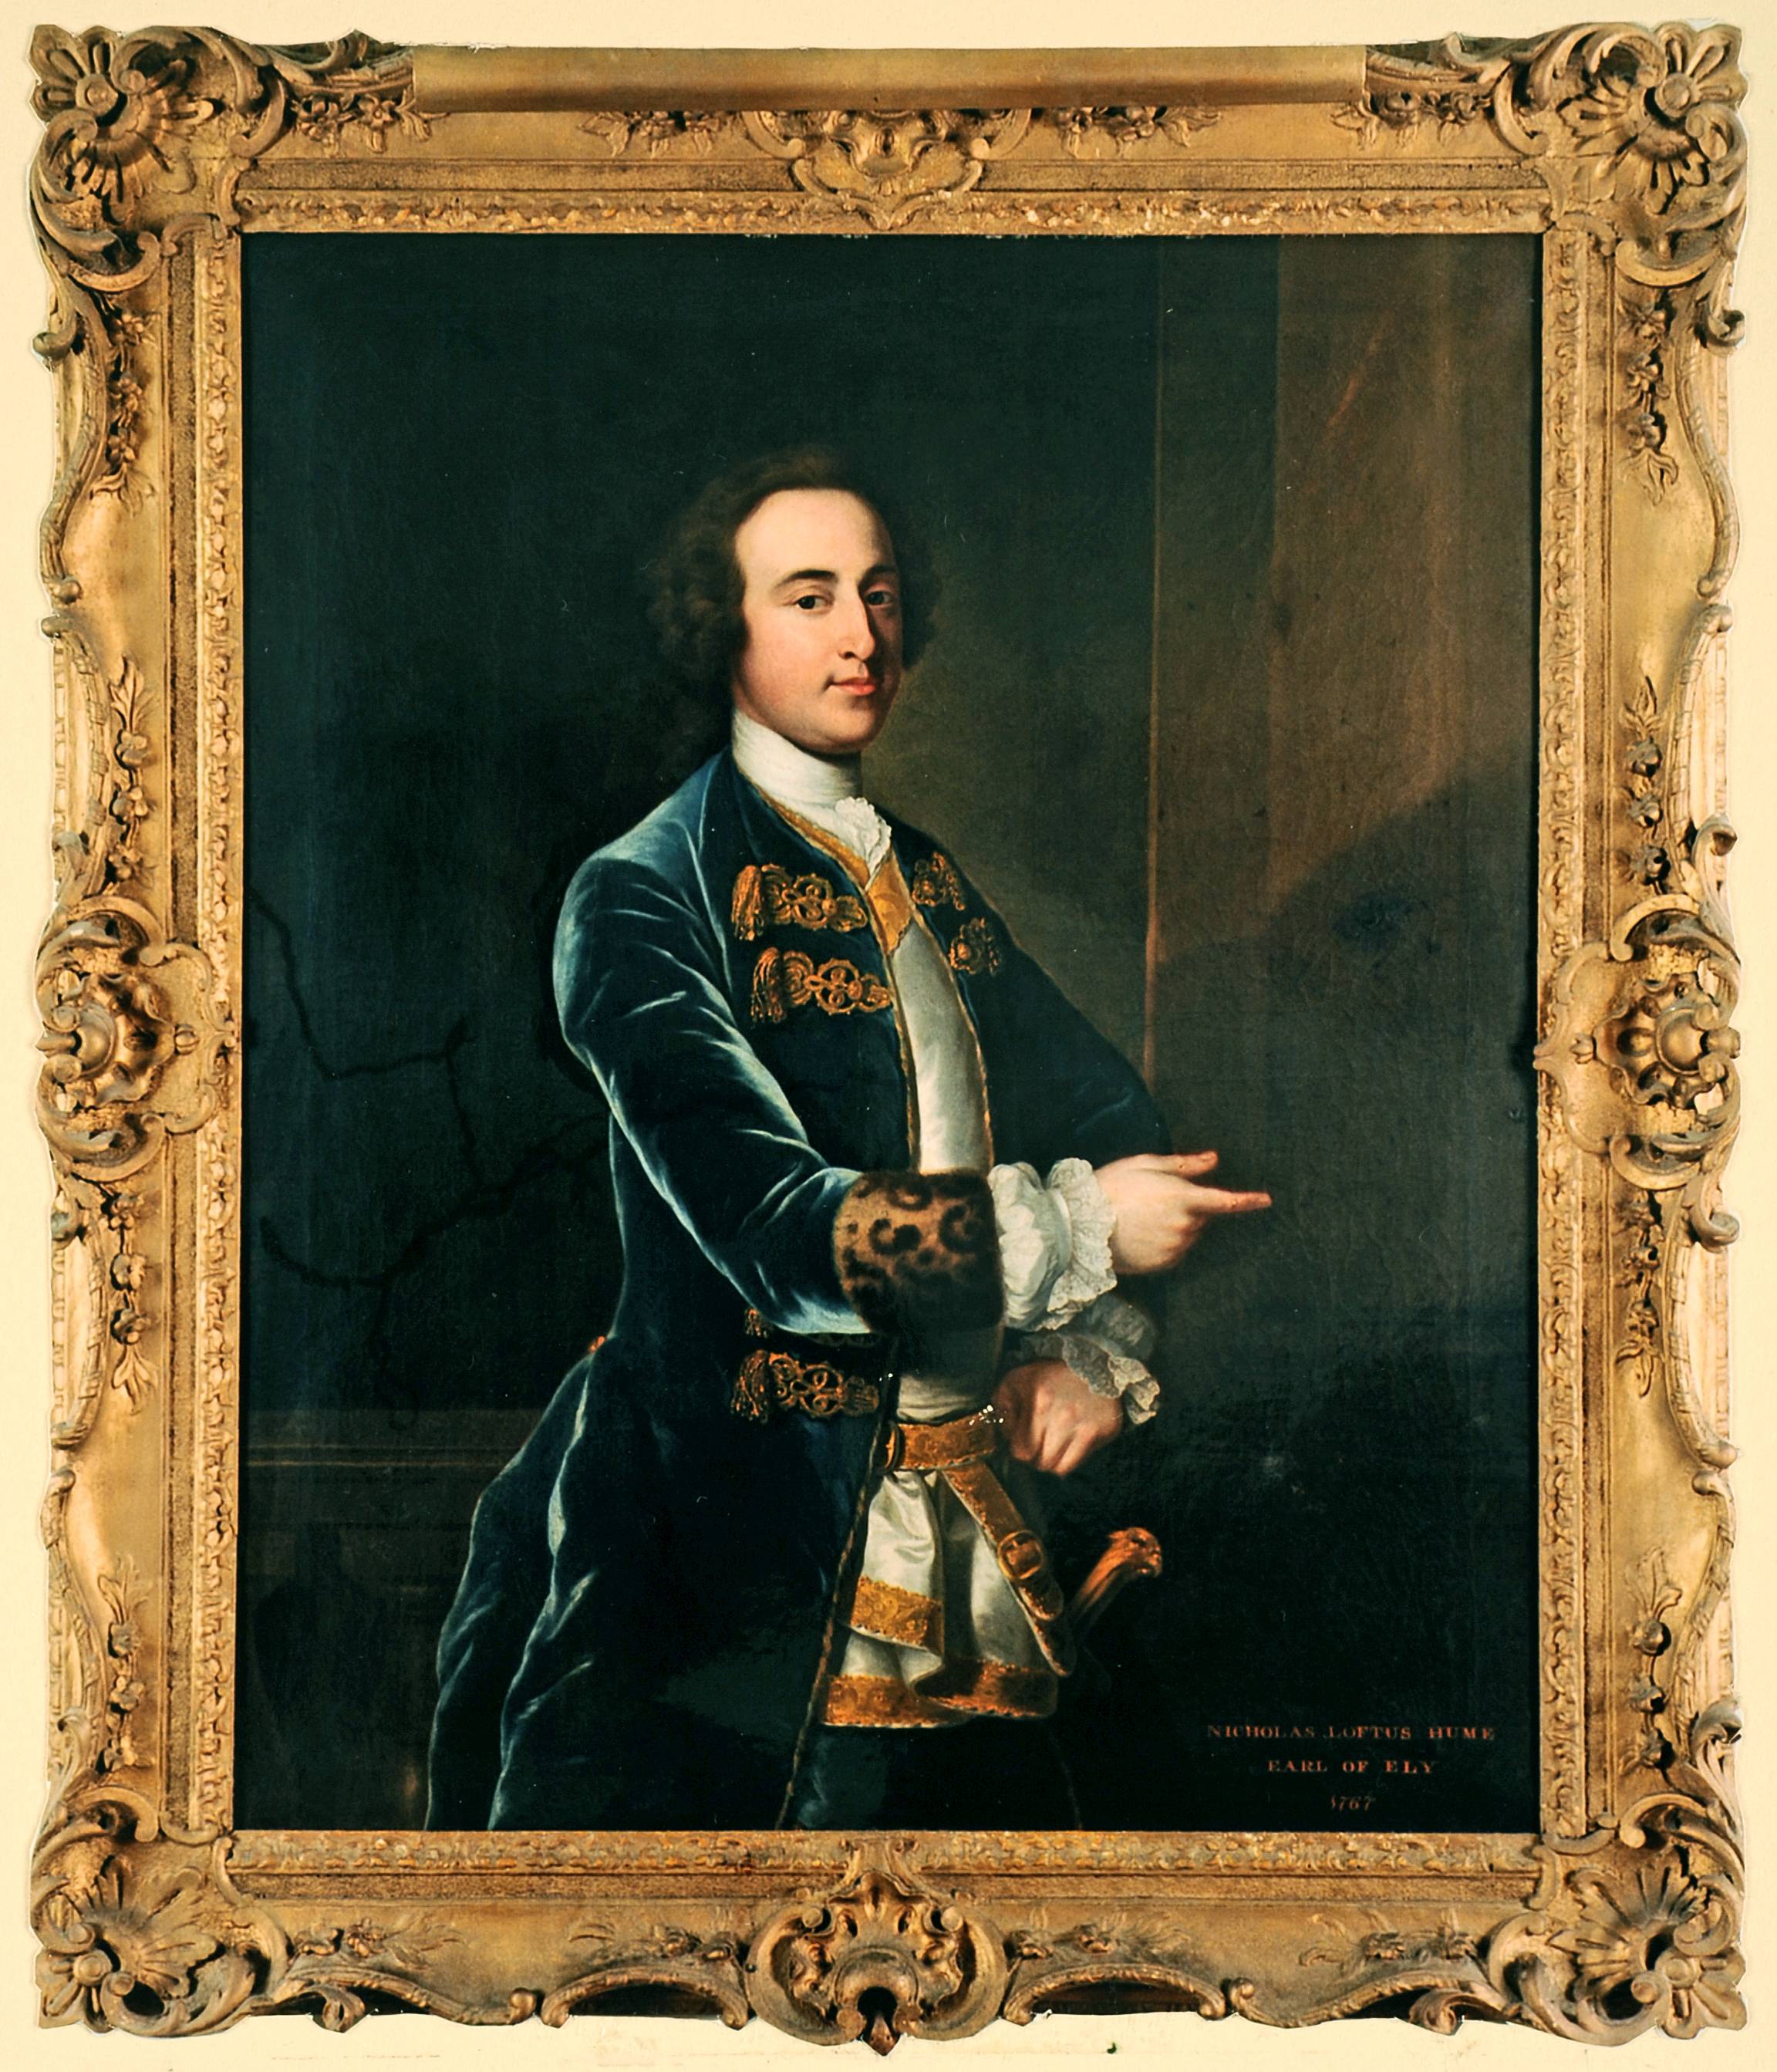 This portrait is of Nicholas Loftus Hume, 2nd Earl of Ely and is attributed to Robert Hunter. The painting is in a private collection, and the image is courtesy of Simon Loftus. 